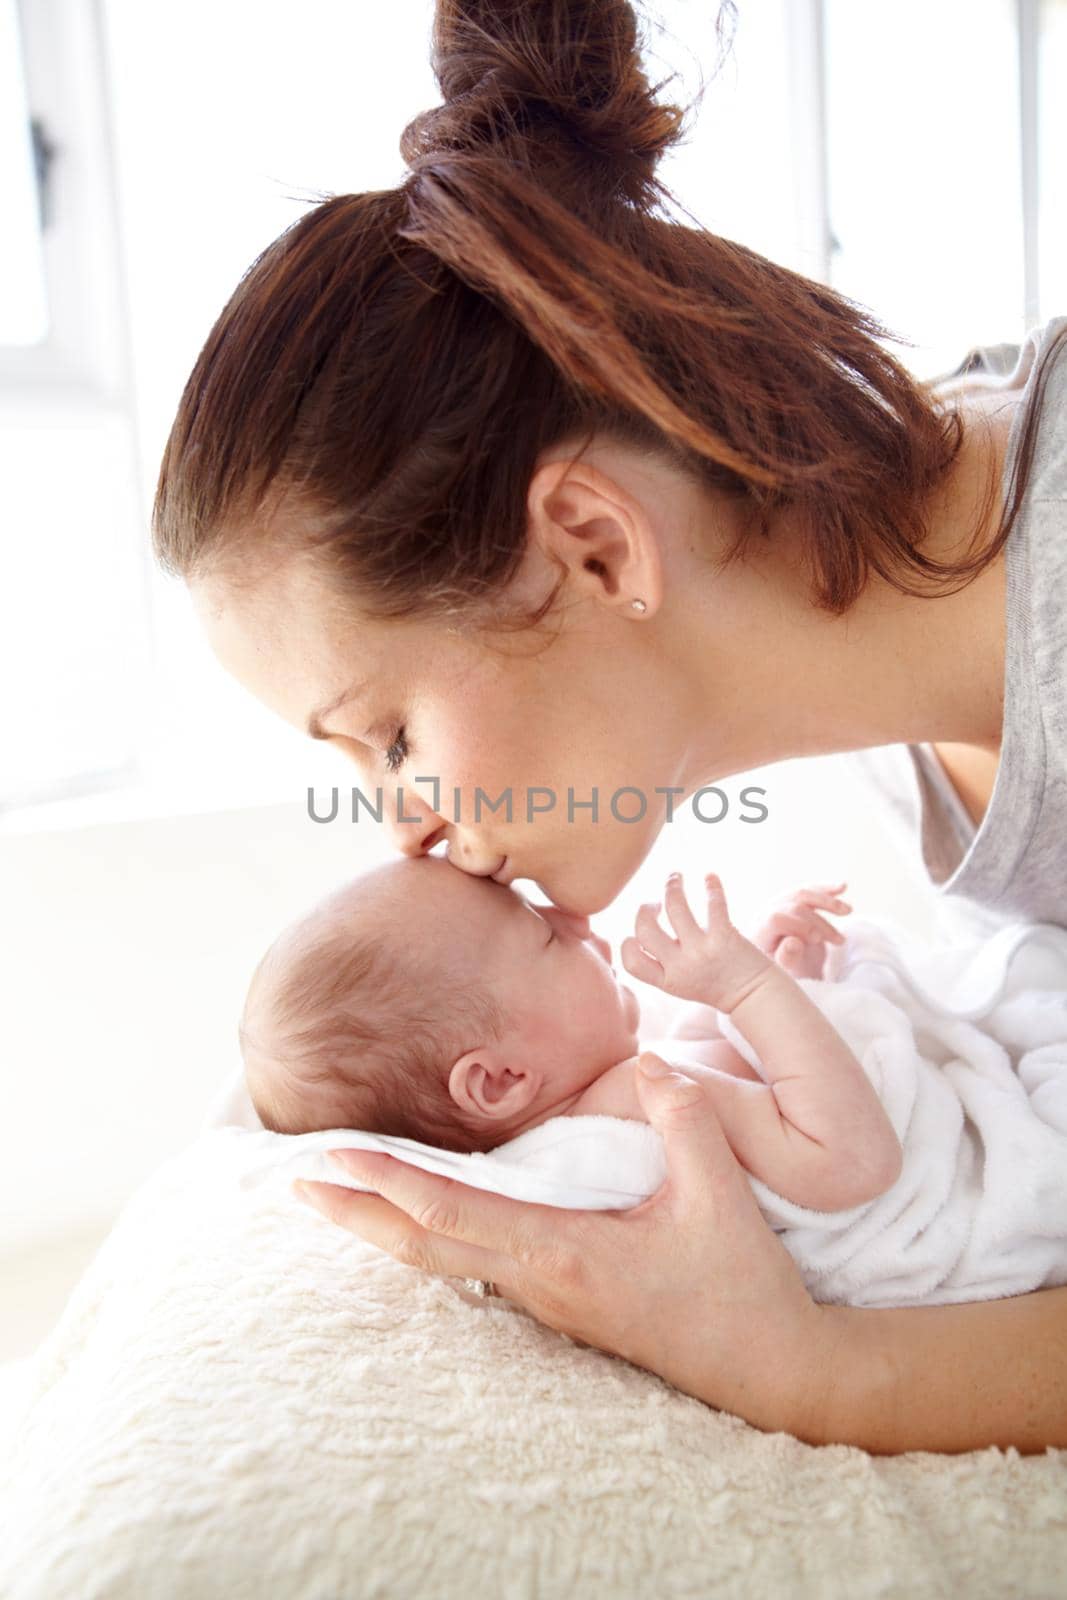 Theres no love like that of a mother. Closeup shot of a mother tenderly kissing her newborn baby. by YuriArcurs